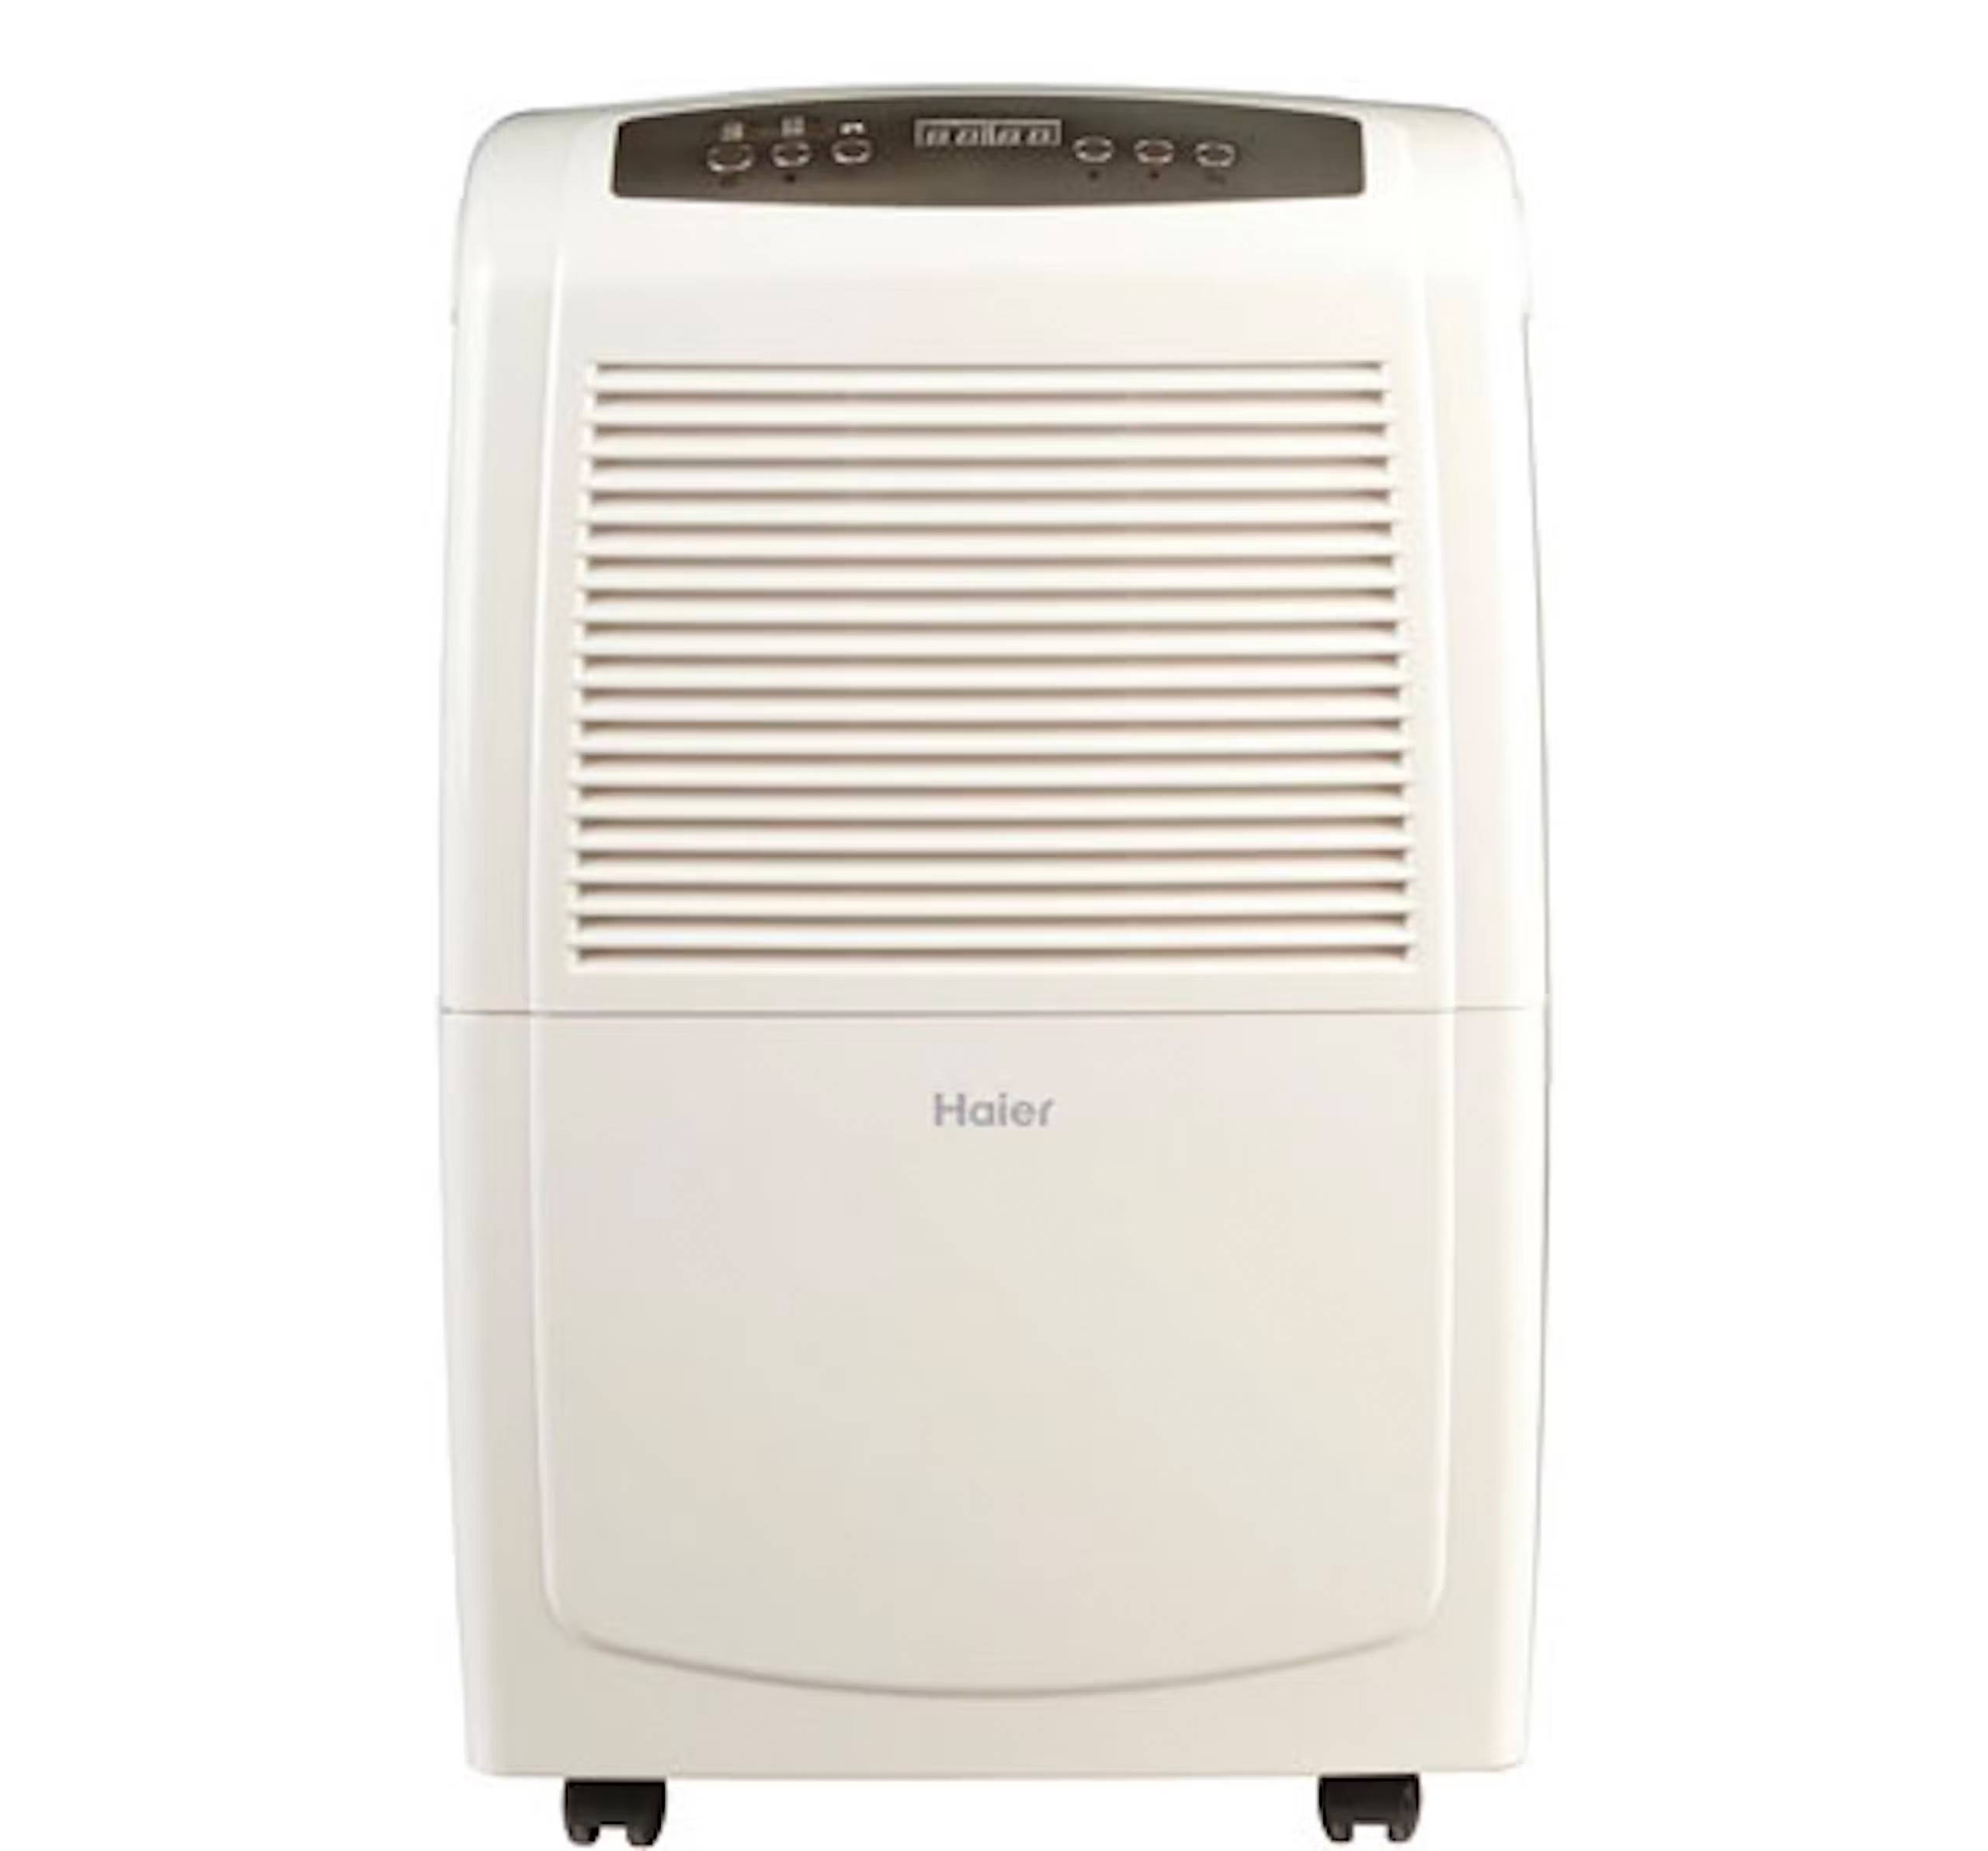 Picture of a Haier dehumidifier